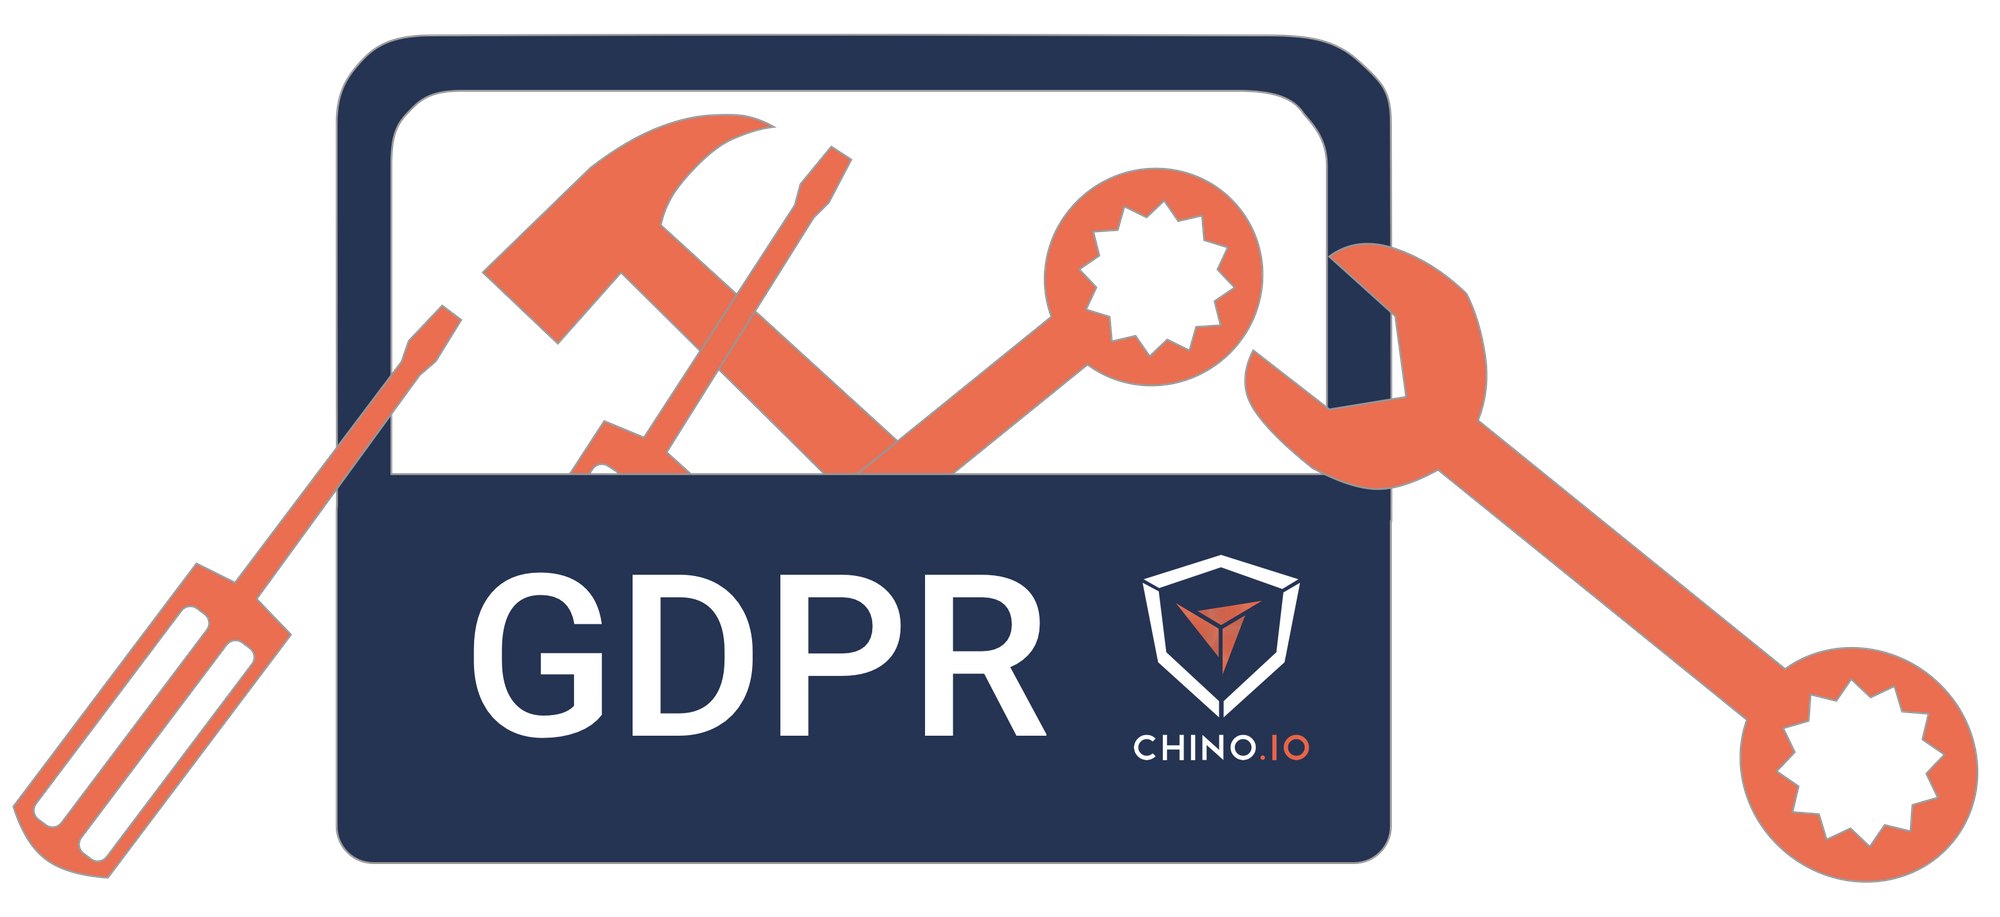 Toolbox in orange and blue that fixes GDPR compliance